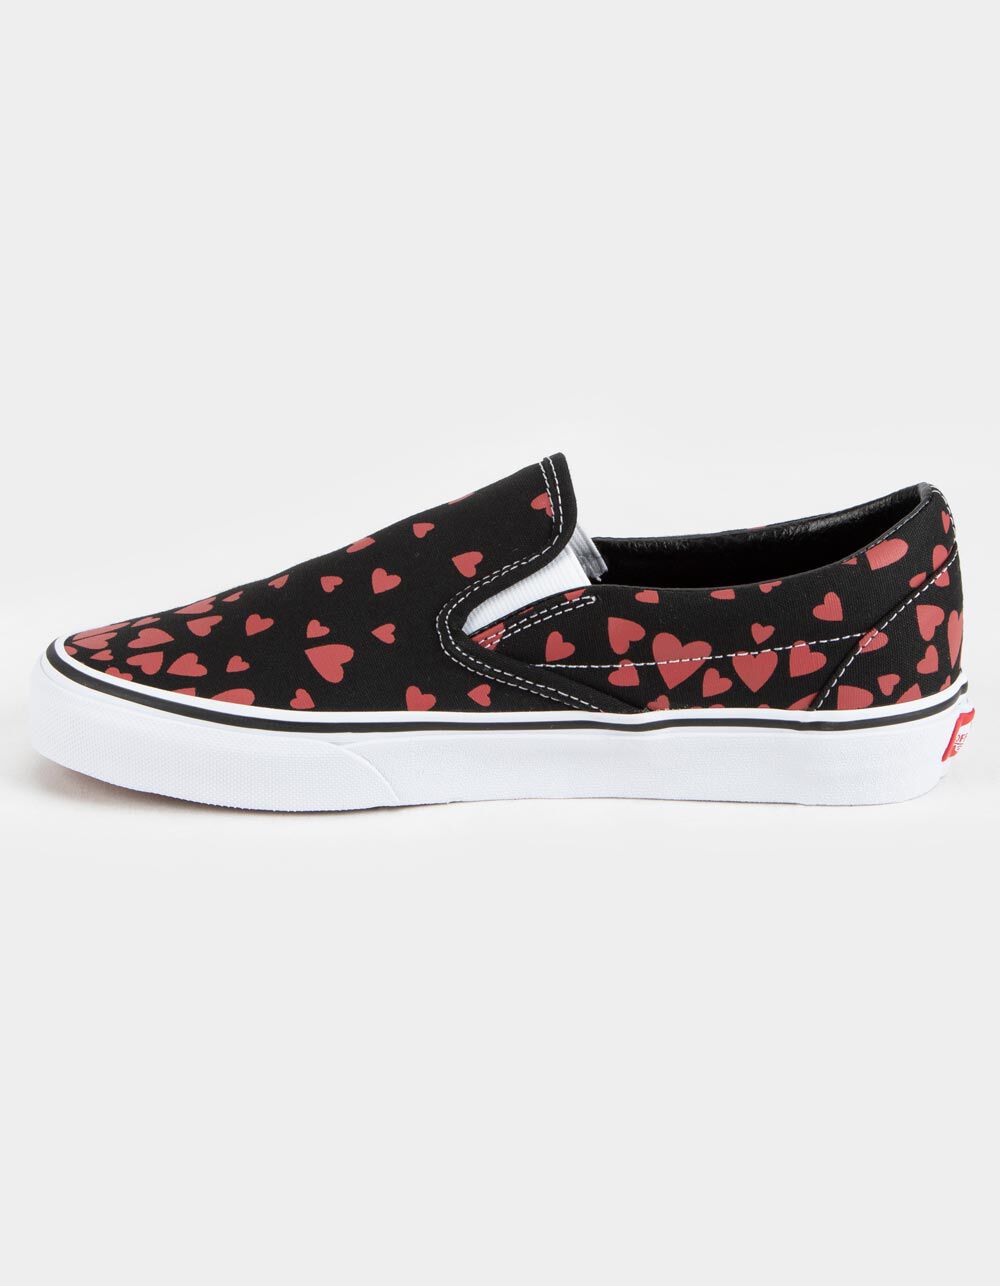 VANS Valentines Hearts Classic Slip-On Womens Shoes